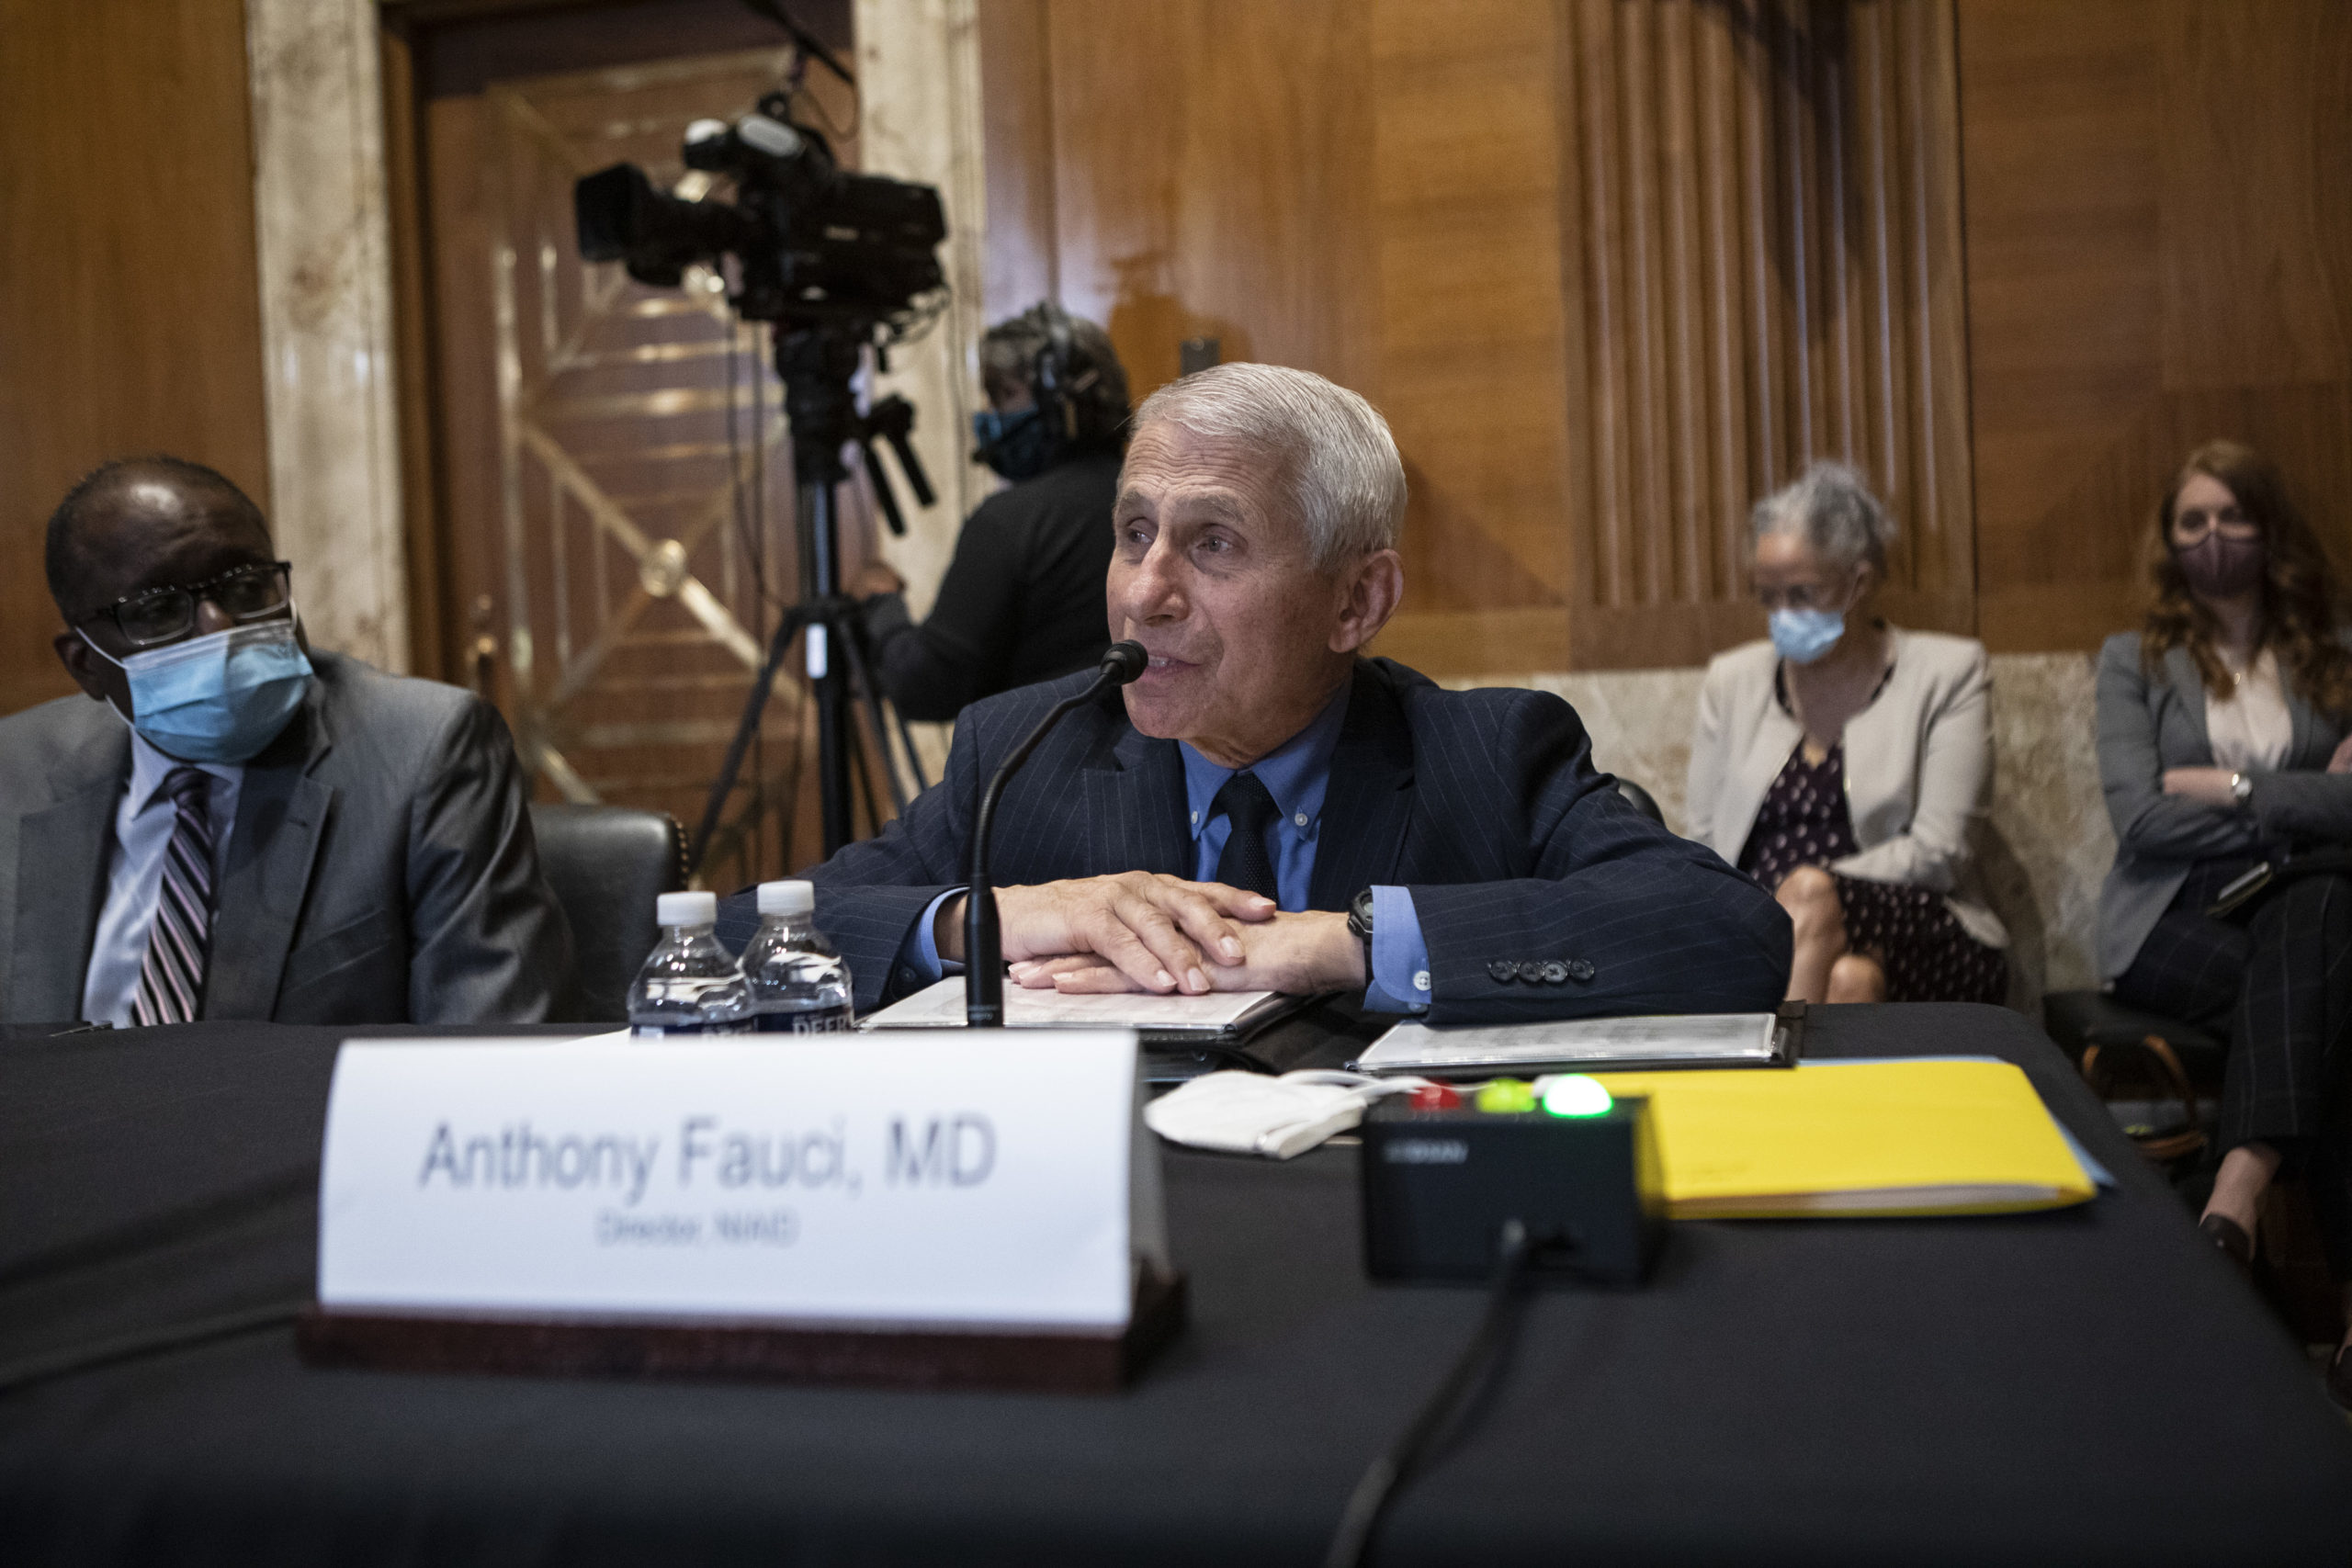 Dr. Anthony Fauci, Director of the National Institute of Allergy and Infectious Diseases testifies during a Senate Appropriations Subcommittee on Labor, Health and Human Services, Education, and Related Agencies hearing on Capitol Hill on May 17, 2022 in Washington, DC. The committee is hearing testimony on President Biden's fiscal year 2023 budget request for the National Institutes of Health. (Photo by Anna Rose Layden-Pool/Getty Images)